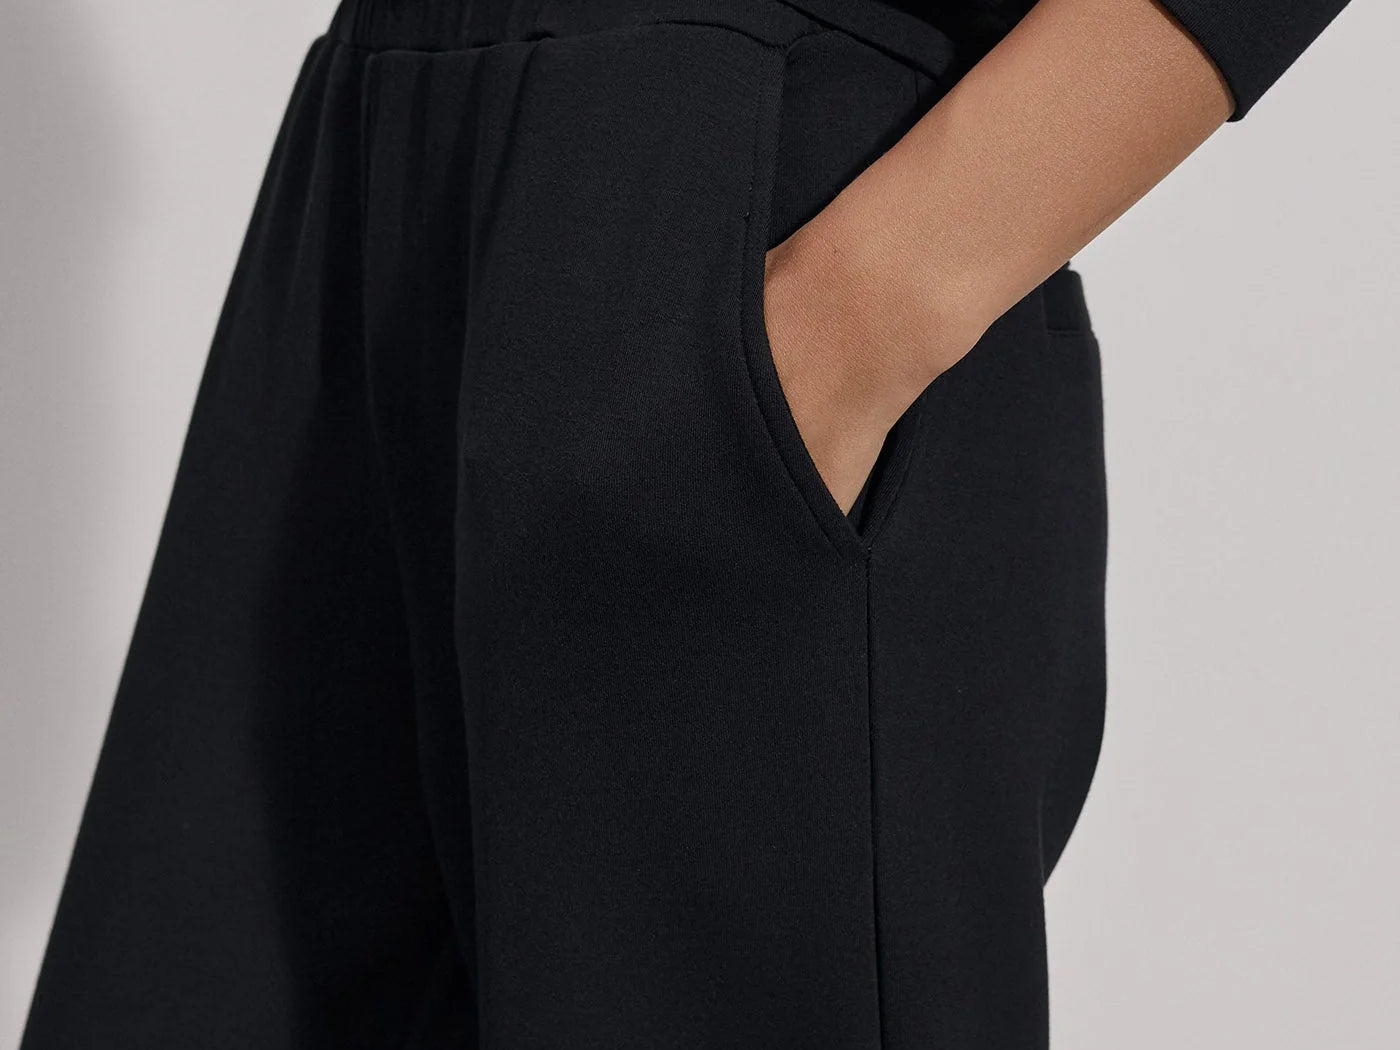 Cut to a versatile relaxed fit with pleats at the cuff to create fullness, this pant features an elasticated waistband with an internal drawcord, sipe pockets, and back welt pockets. 